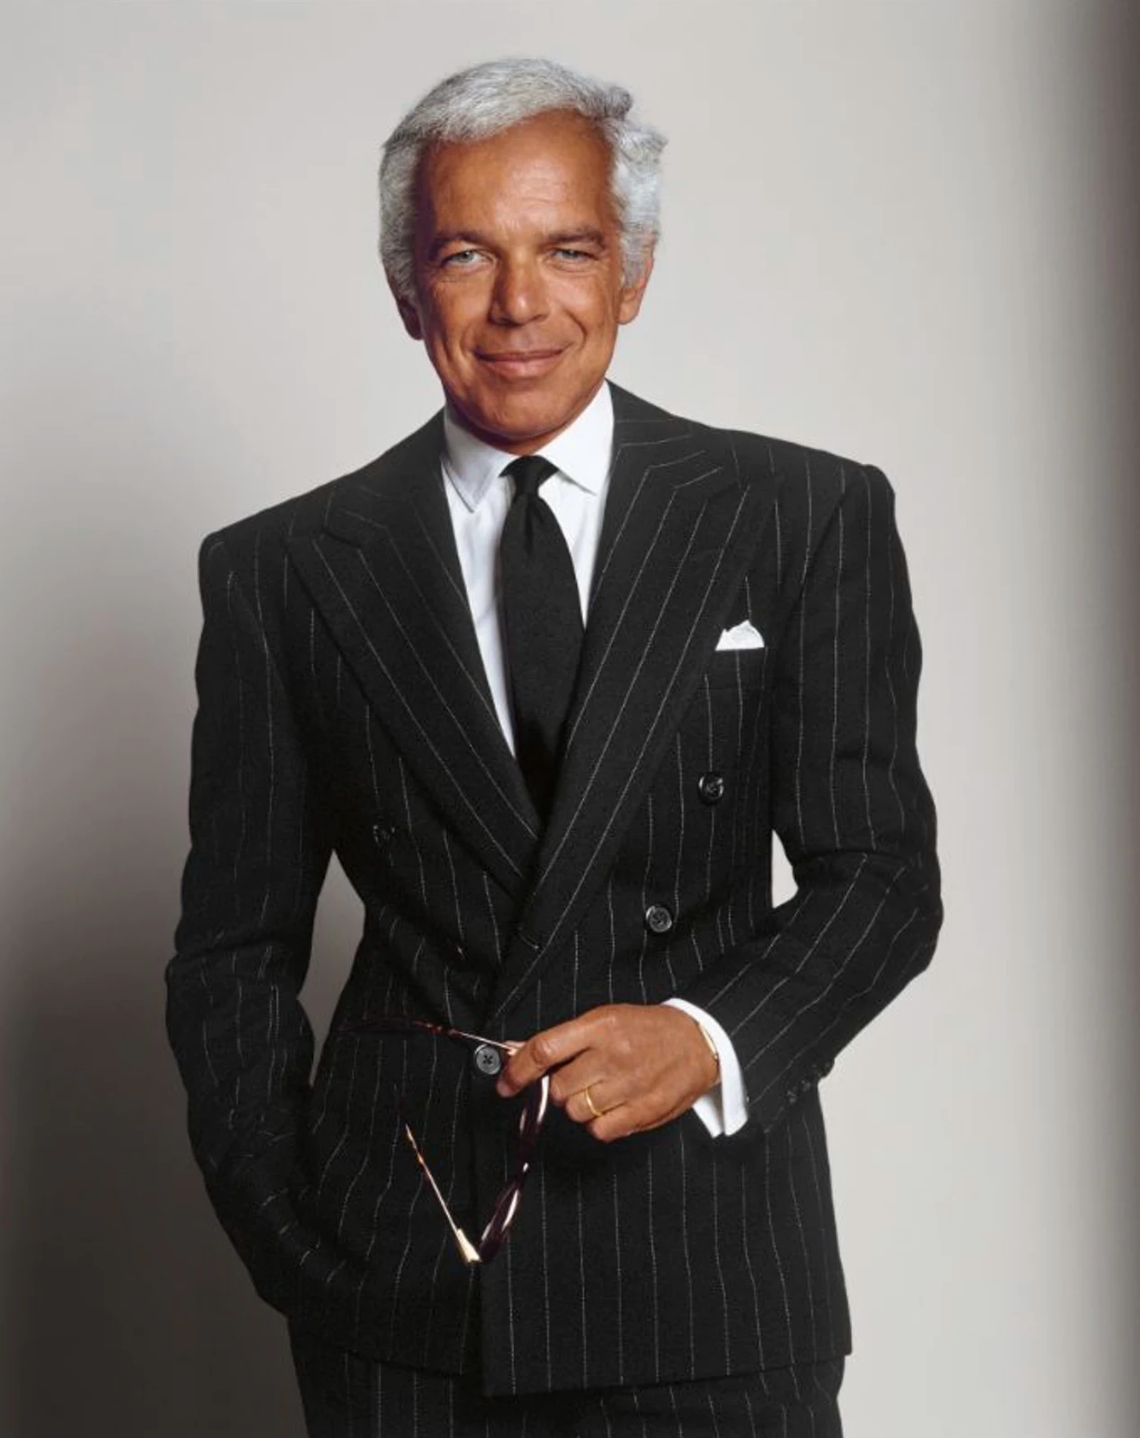 Ralph Lauren — Do Your Thing. Mantra: “Be yourself. Everyone else